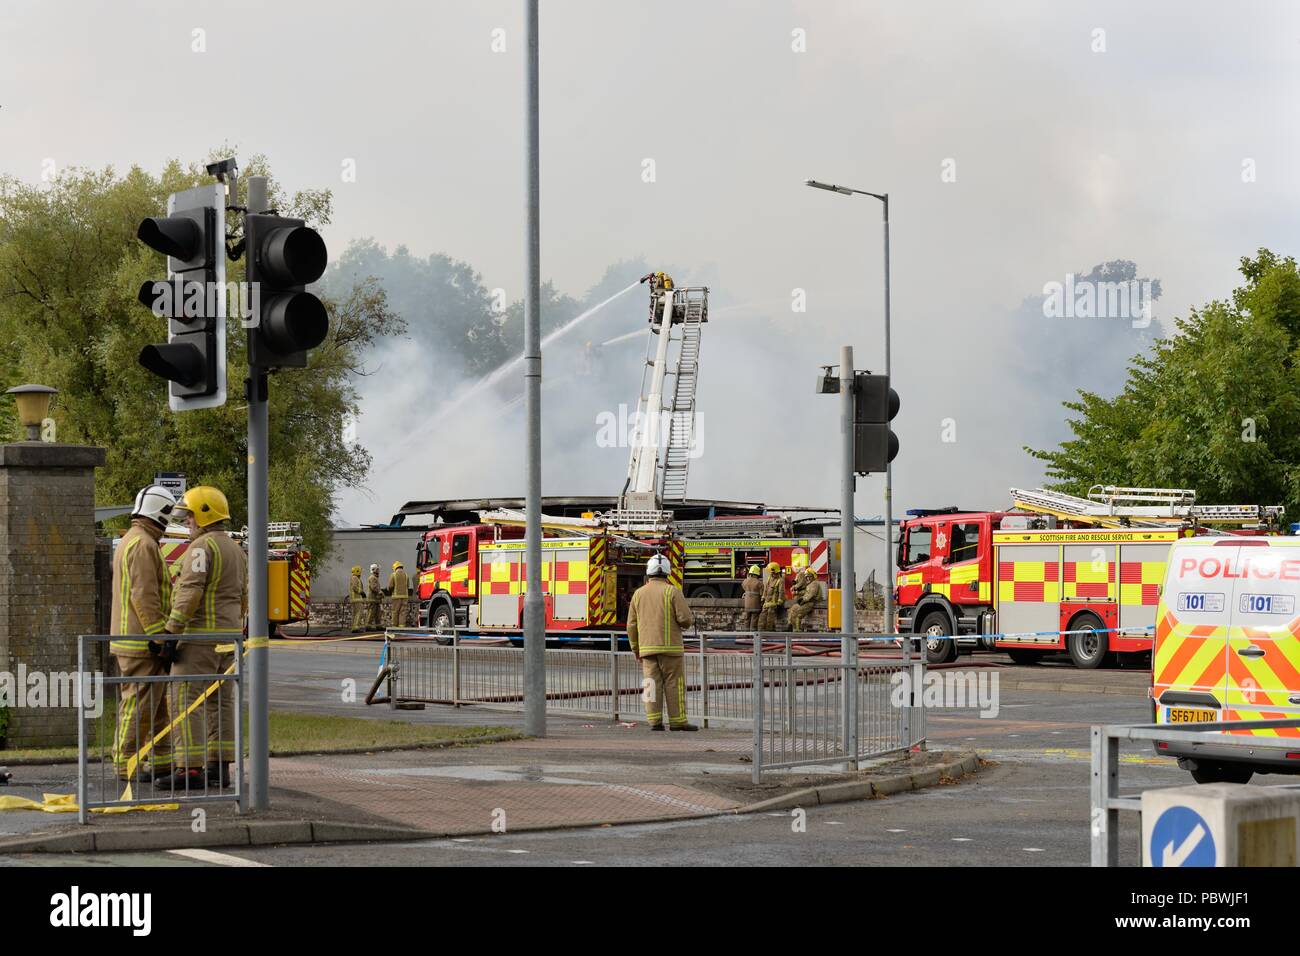 Glasgow, UK. 30th July, 2018. Glasgow, Scotland, UK. A large fire forces the closure of Crookston Rd in Glasgow as fire appliances line the street and firefighters use breathing apparatus and high reach platforms to tackle the blaze. Credit: Douglas Carr/Alamy Live News Stock Photo